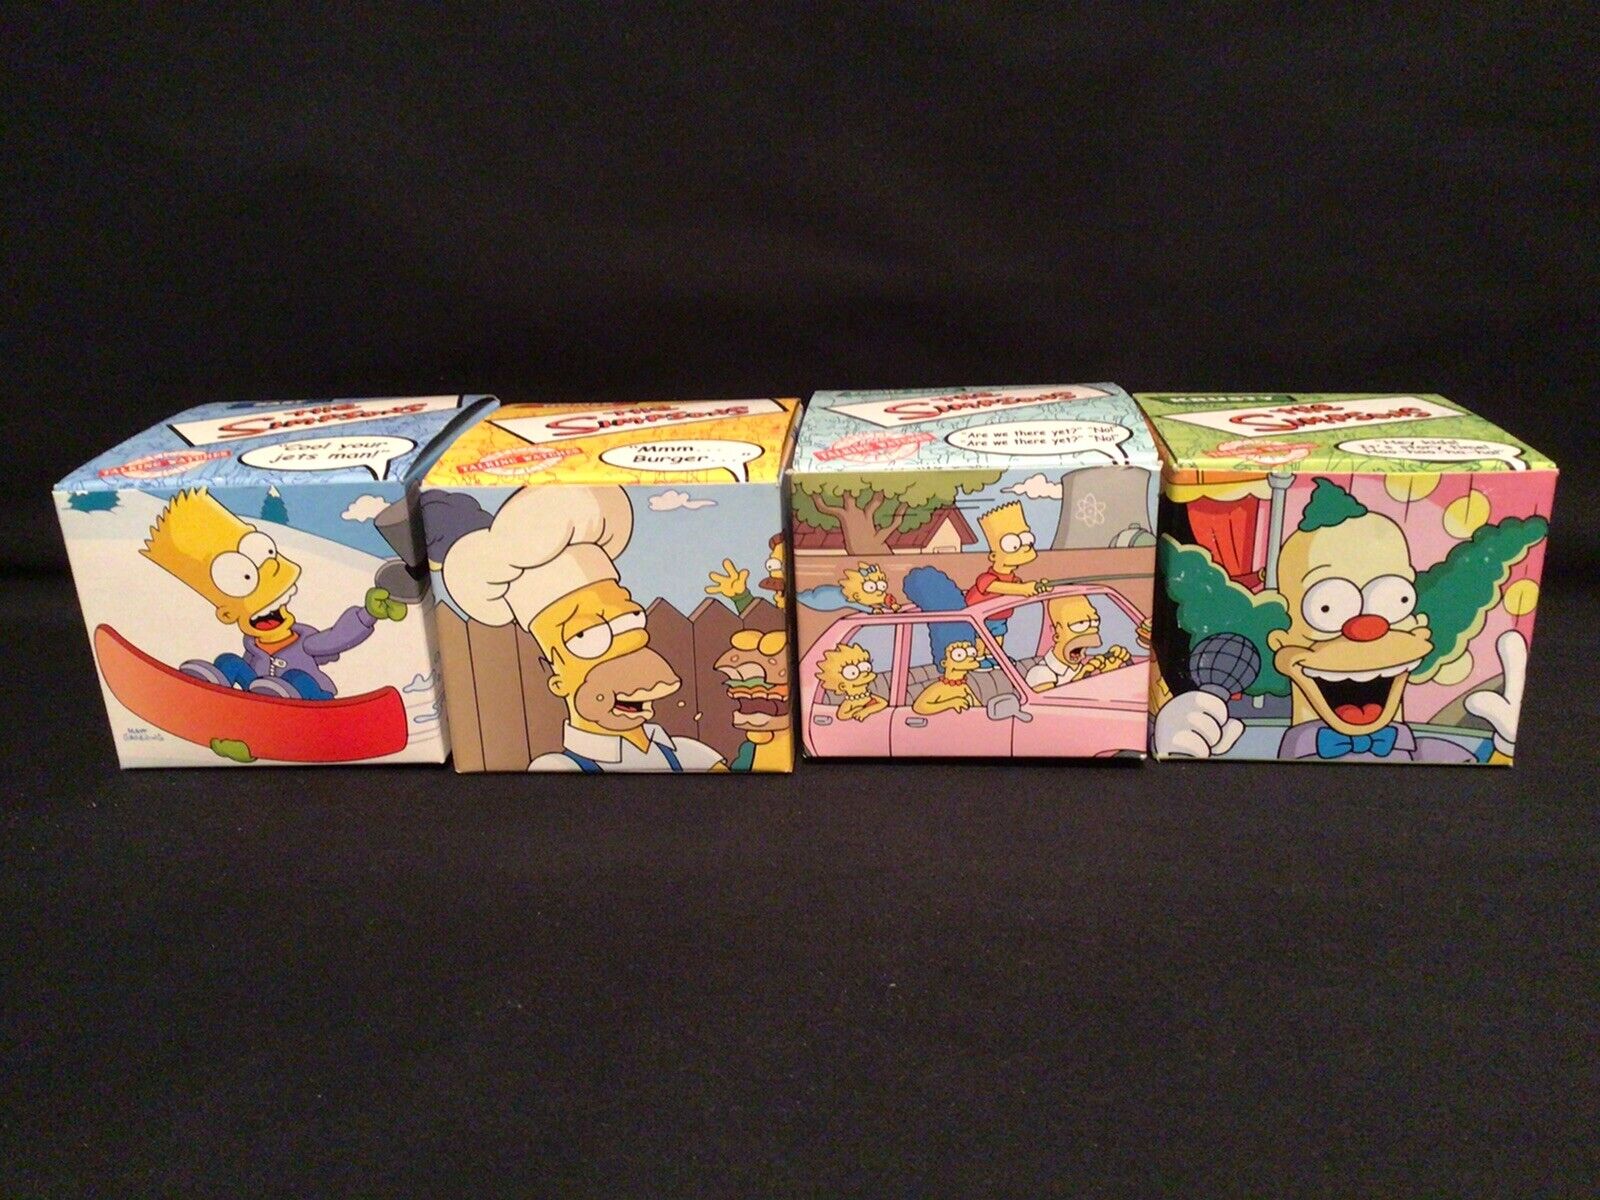 BRAND NEW IN BOX The Simpsons Talking Watches 2002 Burger King S